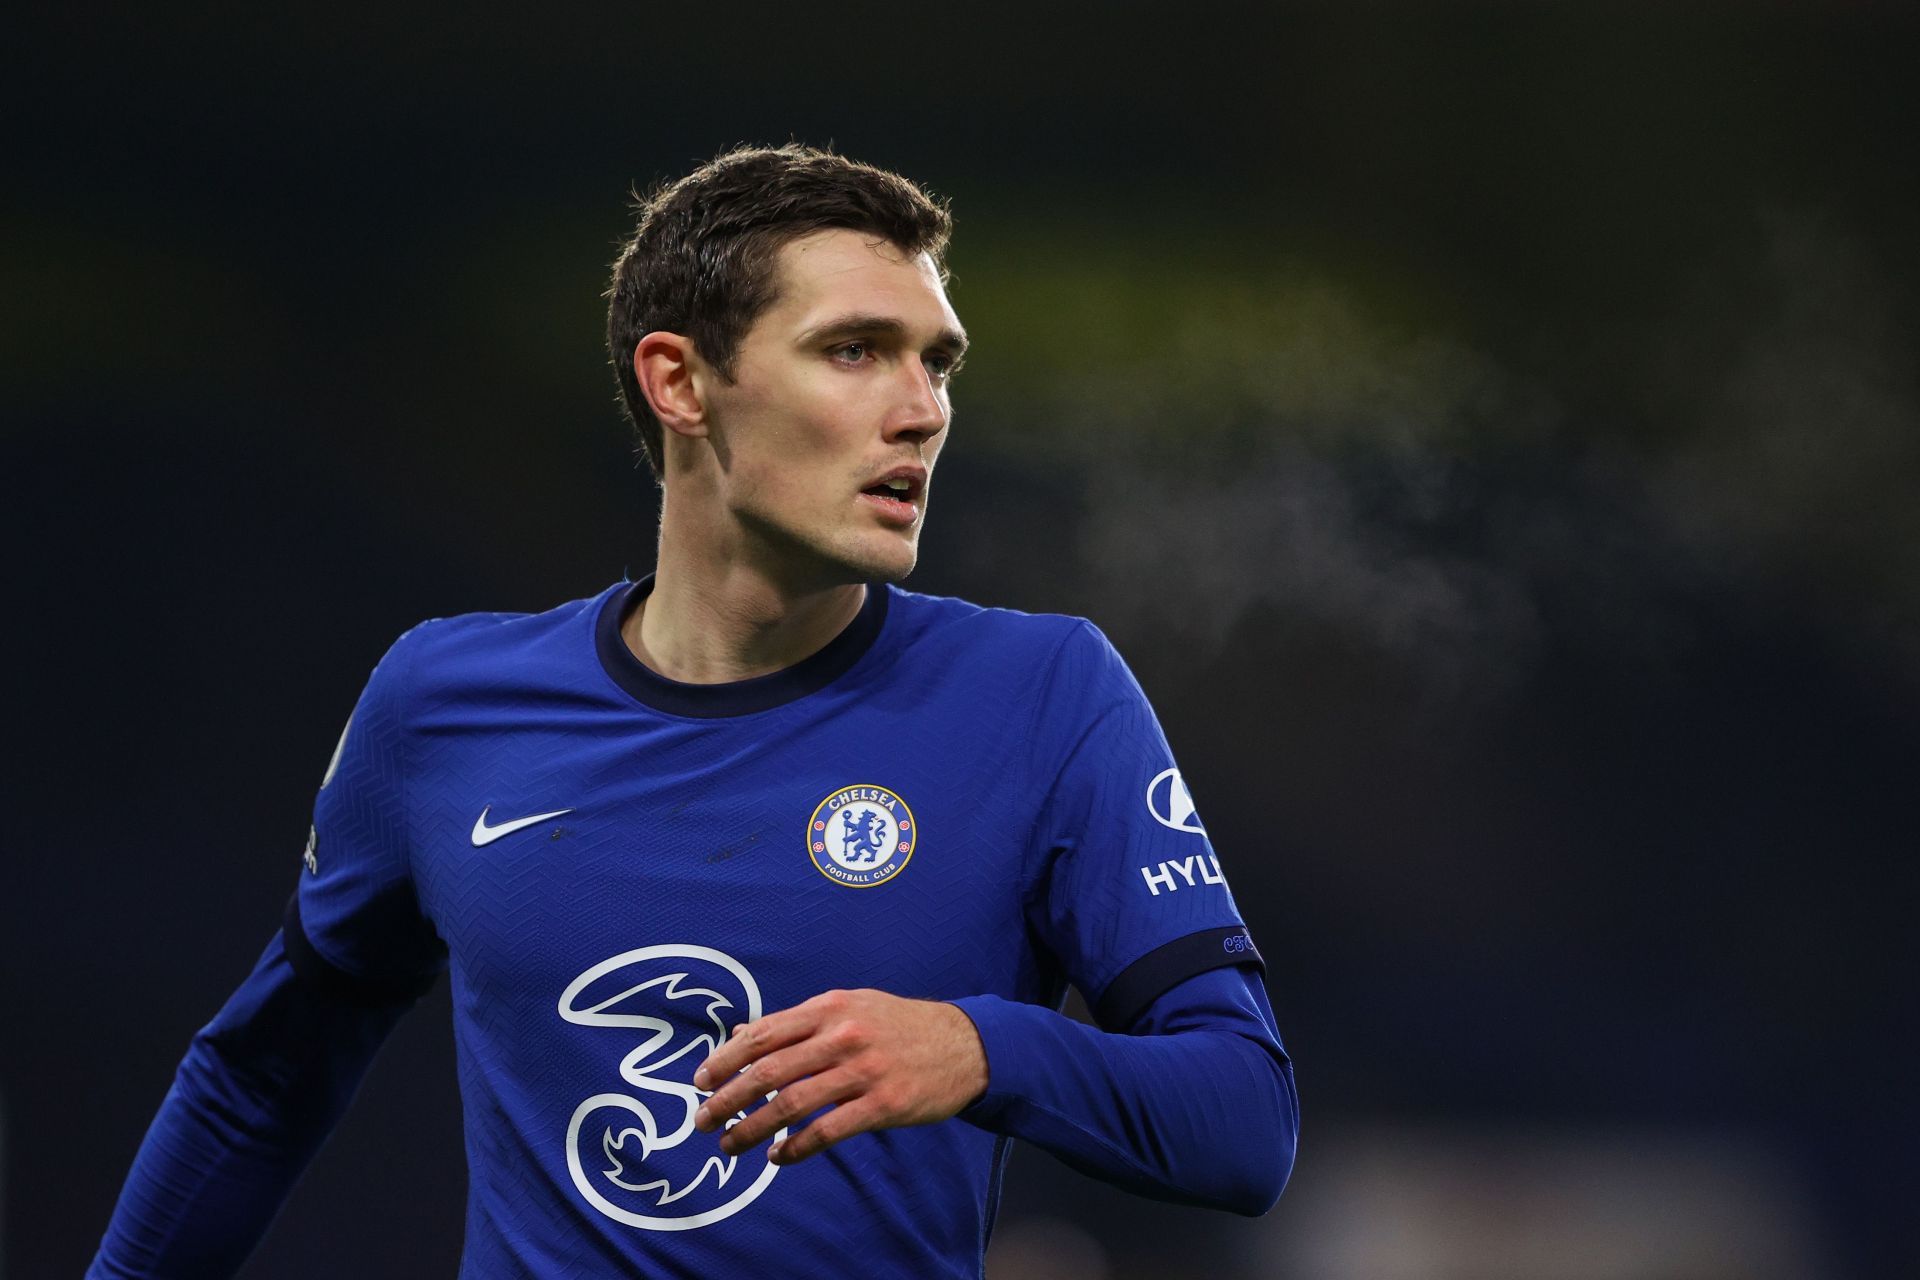 The defender has been a vital figure for Chelsea this season